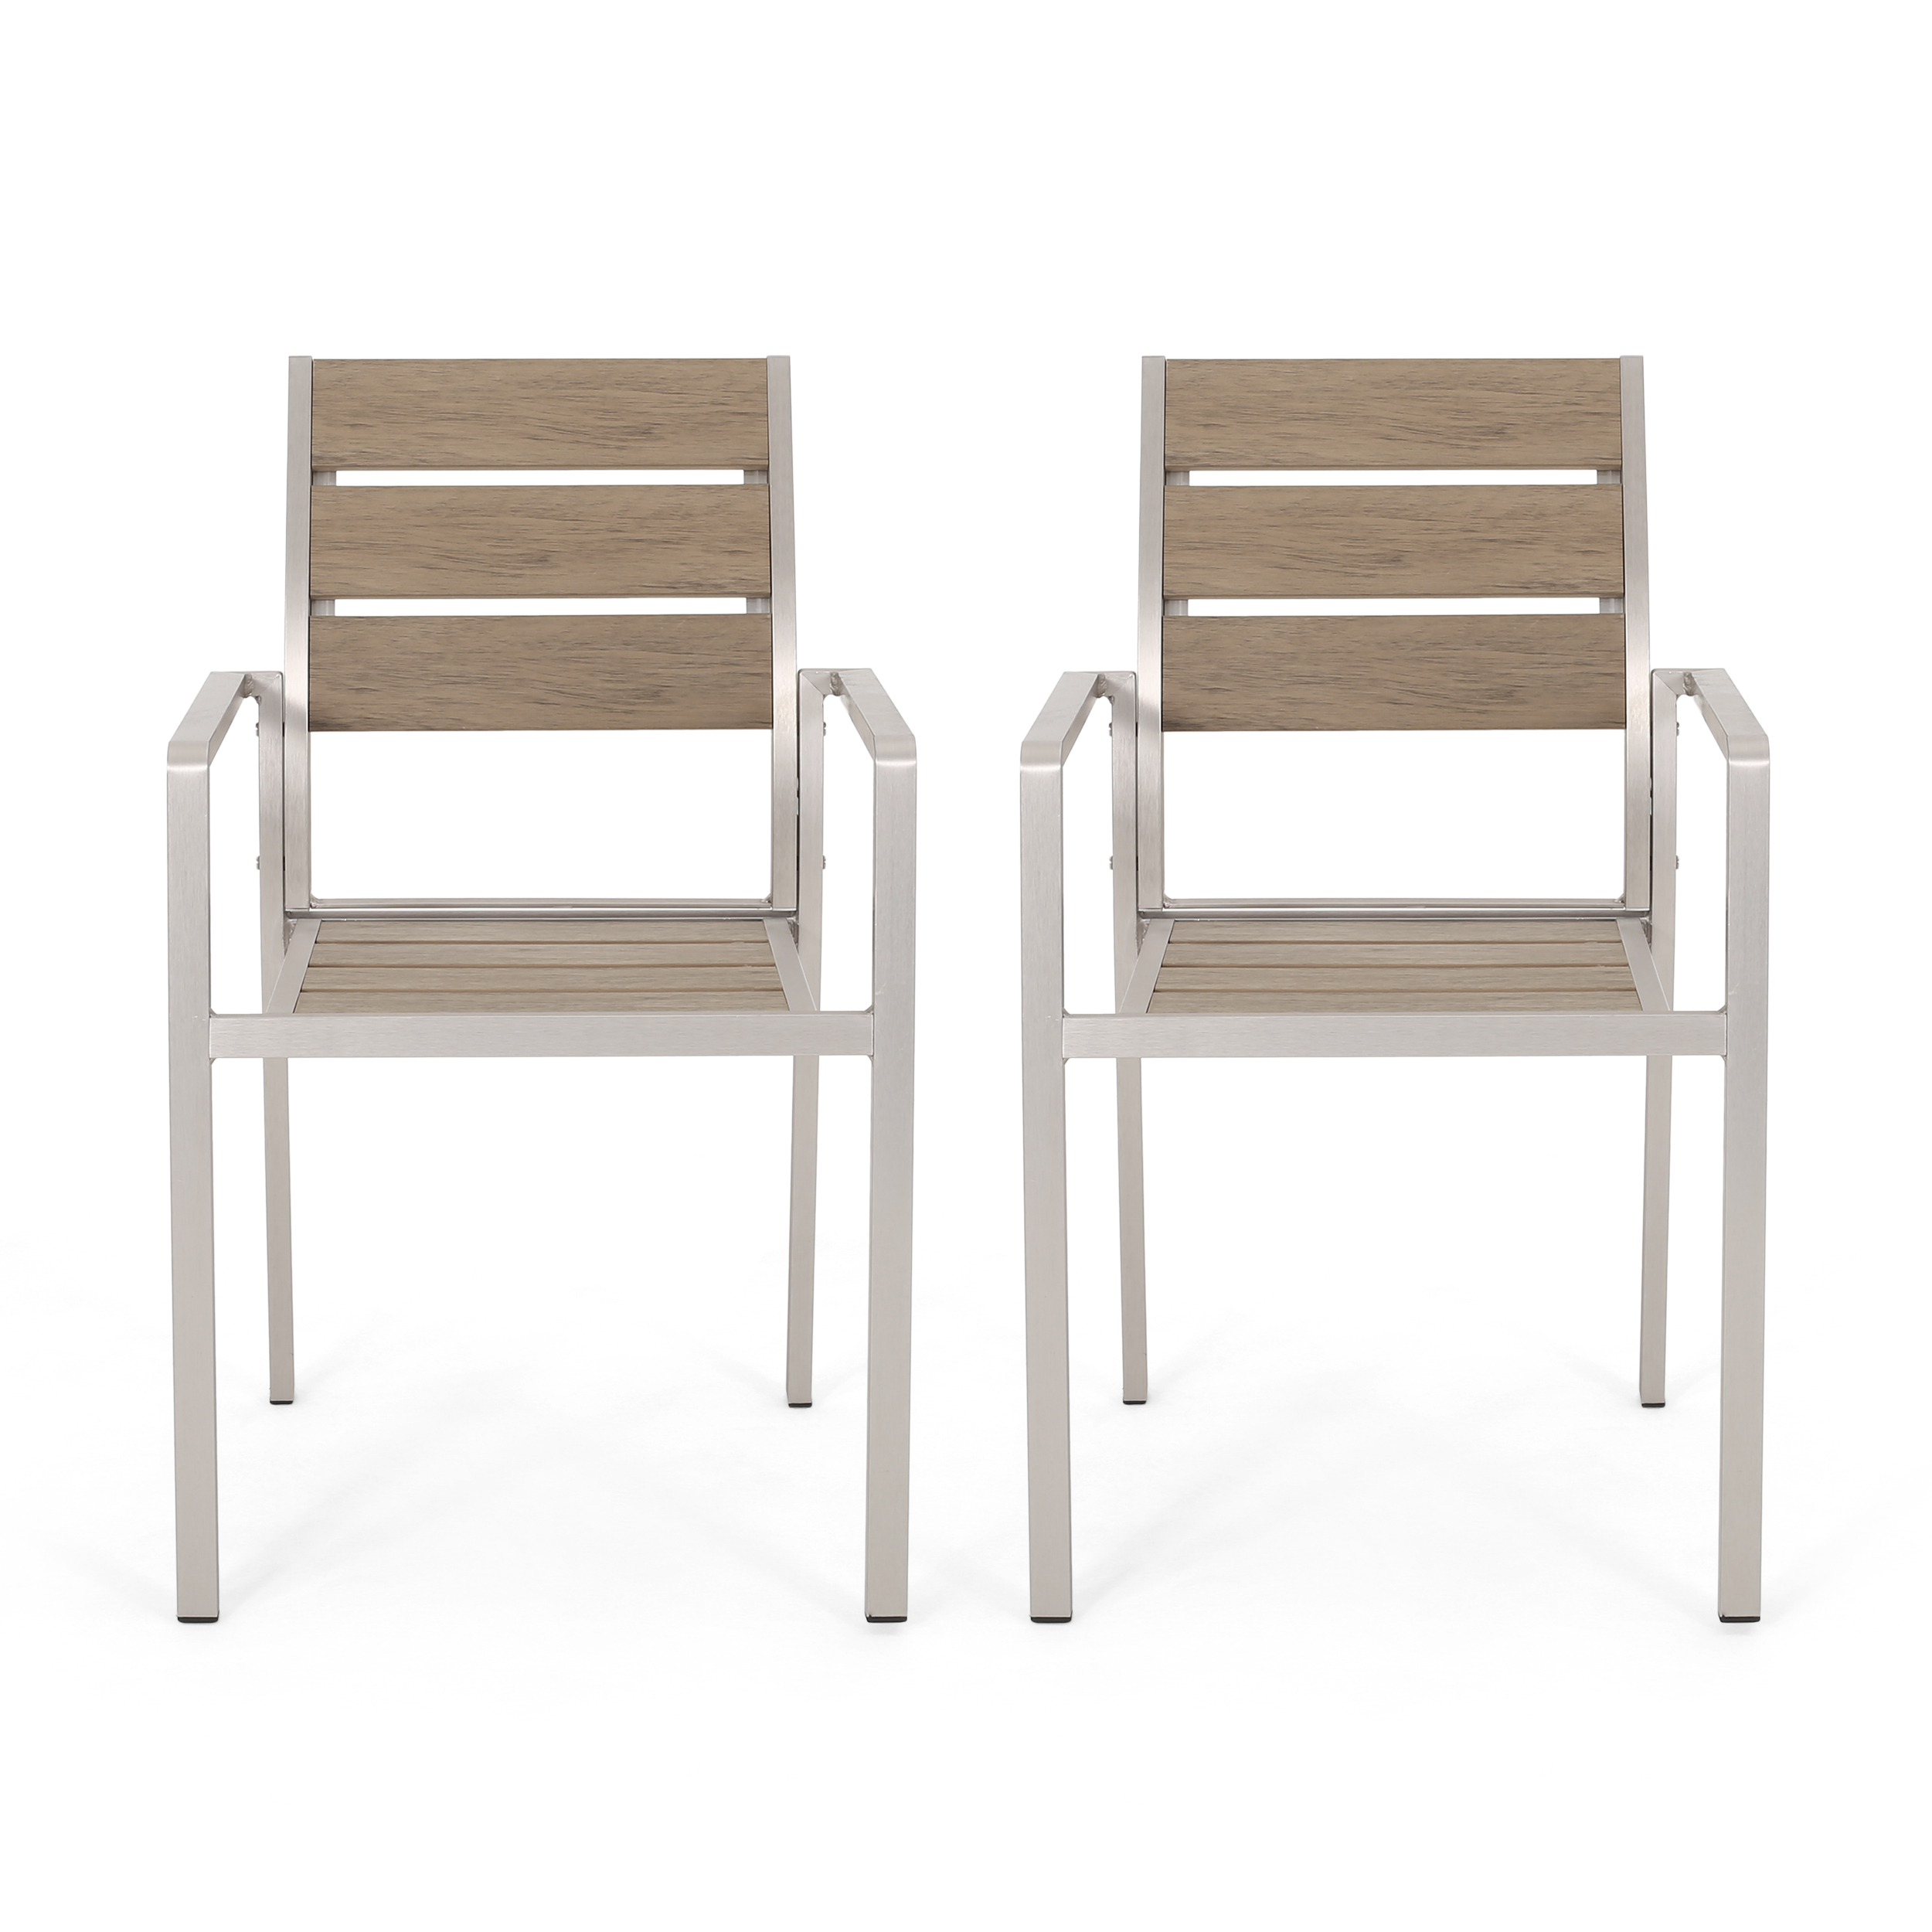 GDF Studio Cherie Outdoor Modern Aluminum Dining Chair with Faux Wood Seat (Set of 2), Natural and Silver - image 1 of 12